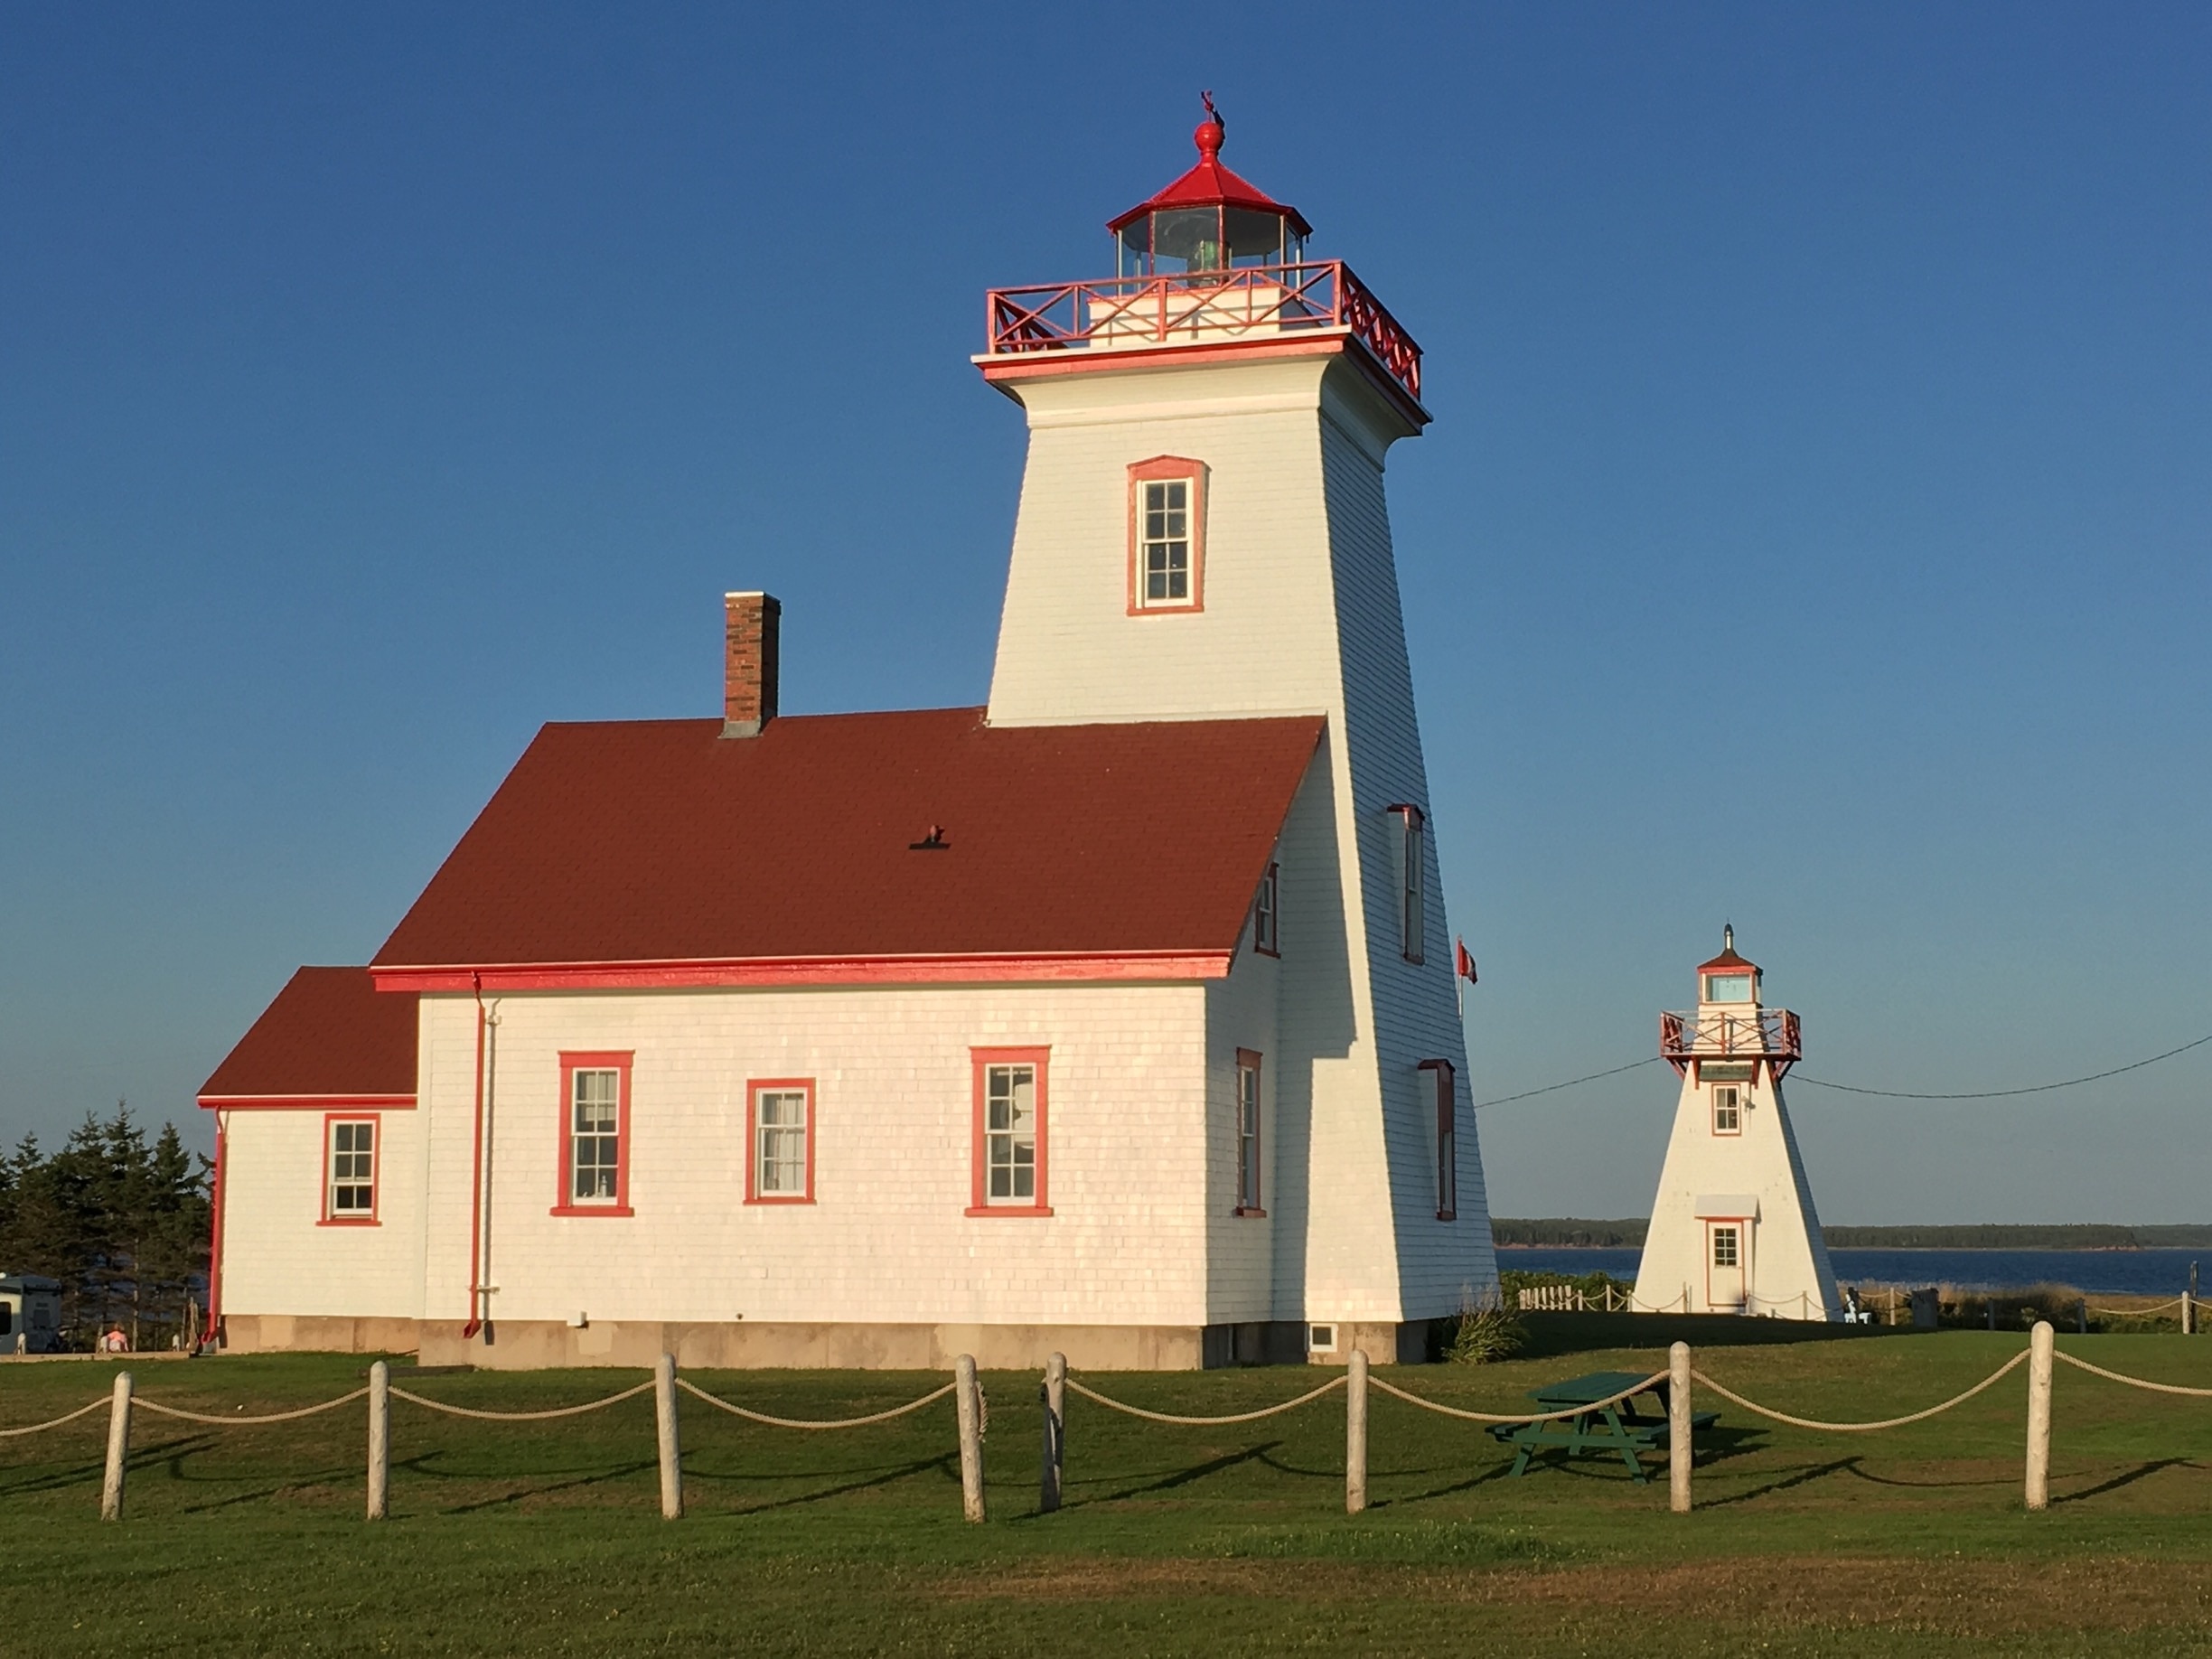 Just arrived by ferry at Prince Edward Island and we were greeted at the dock by these two marvelous lighthouses. The wonderful volunteer at the lighthouse stayed open and gave me an opportunity to climb the lighthouse to see the gorgeous sunset.